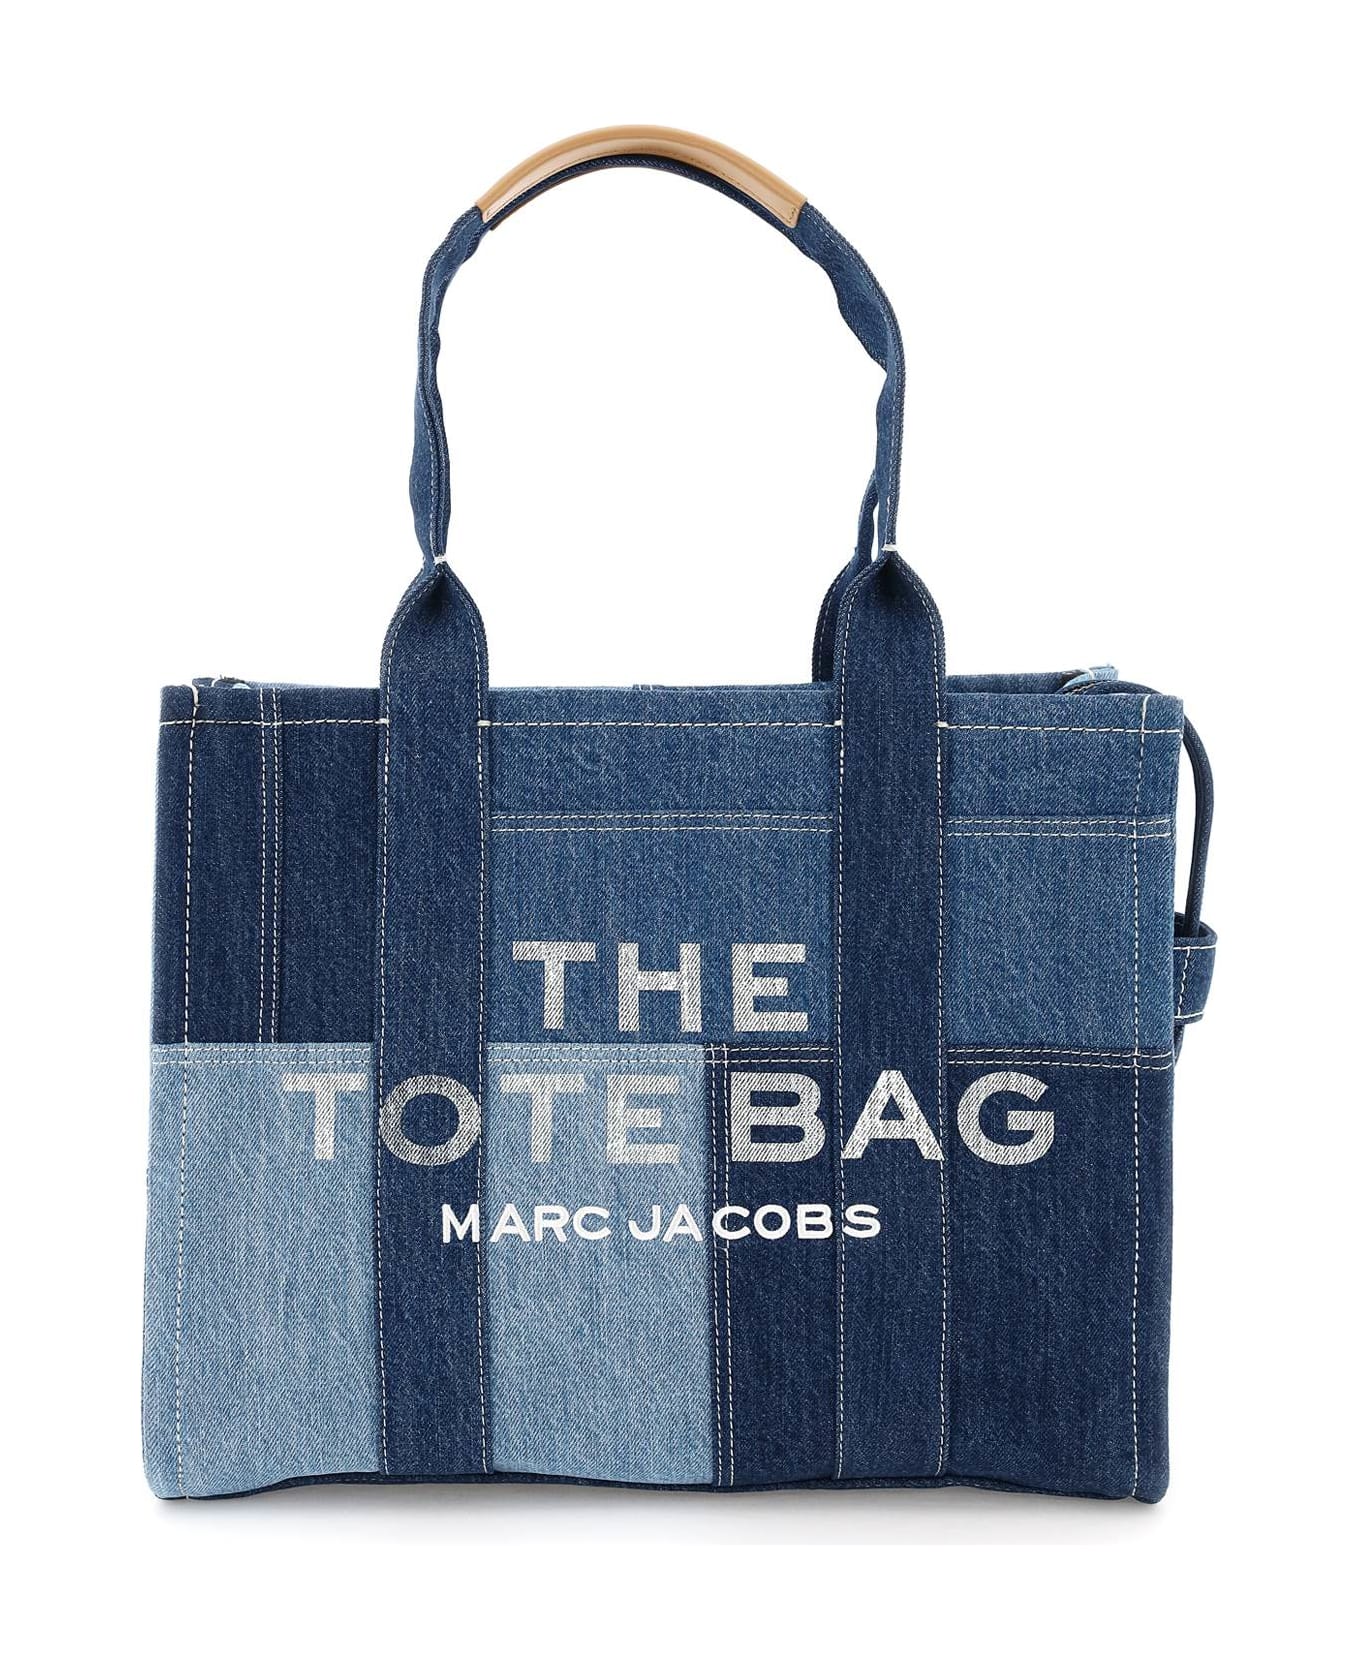 Marc Jacobs The Large Tote Bag - Blue トートバッグ